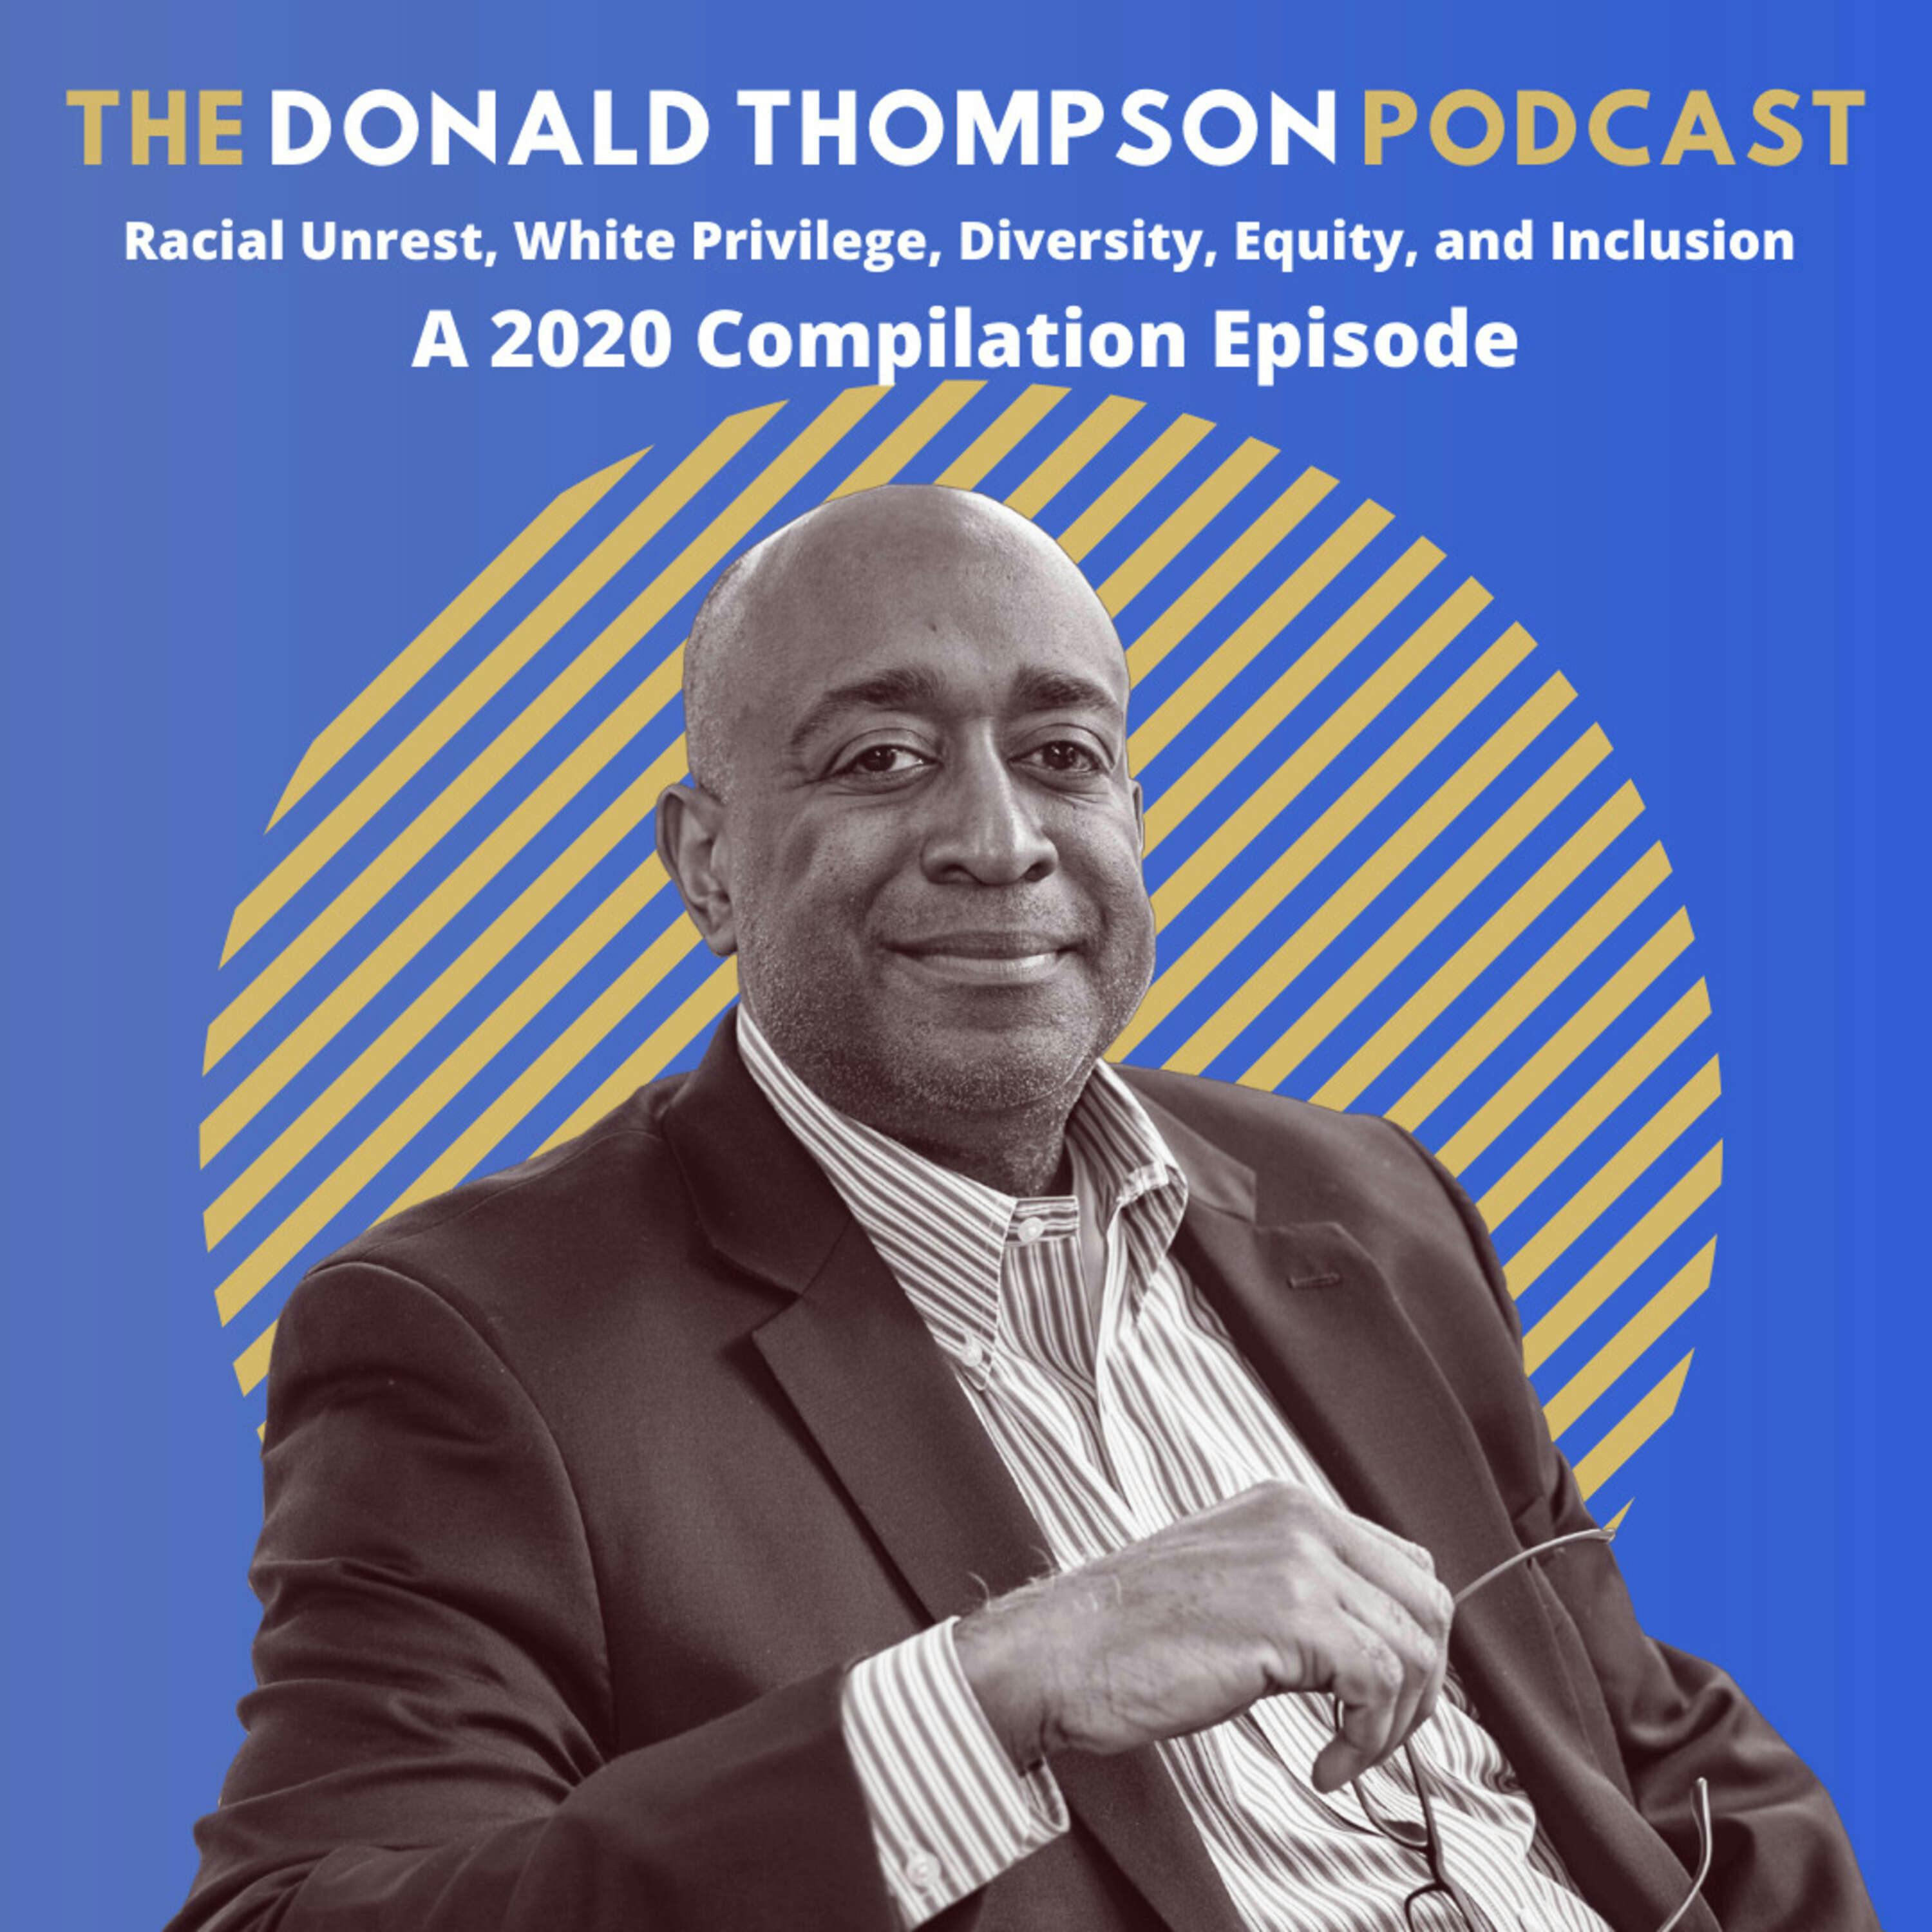 Racial Unrest, White Privilege, Diversity, Equity, and Inclusion: A 2020 Compilation Episode